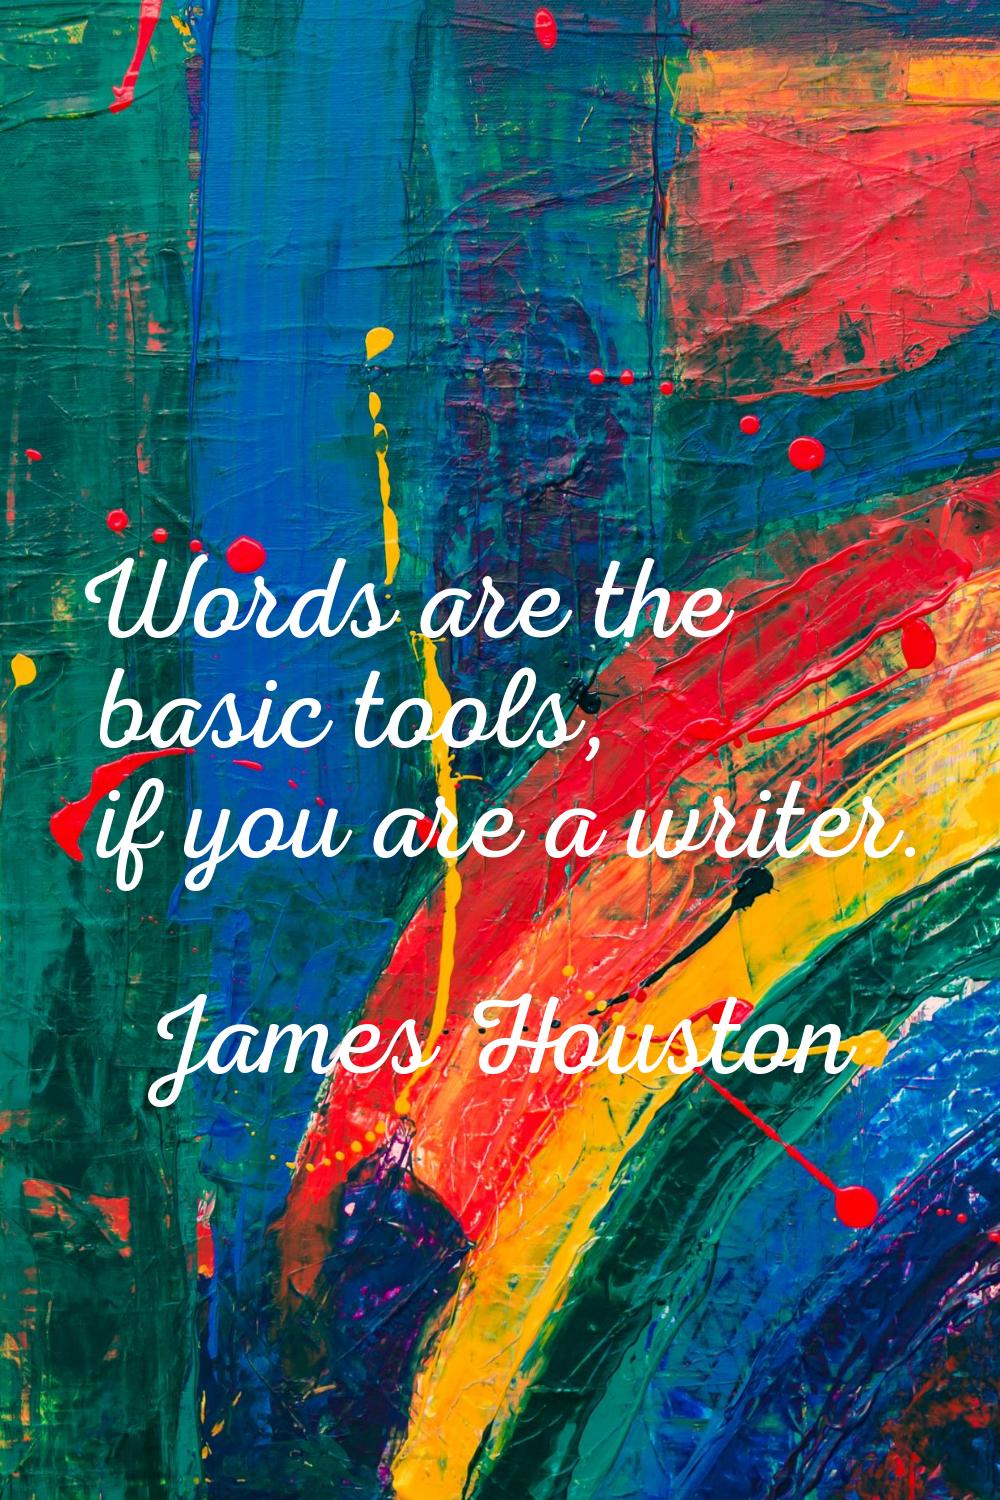 Words are the basic tools, if you are a writer.